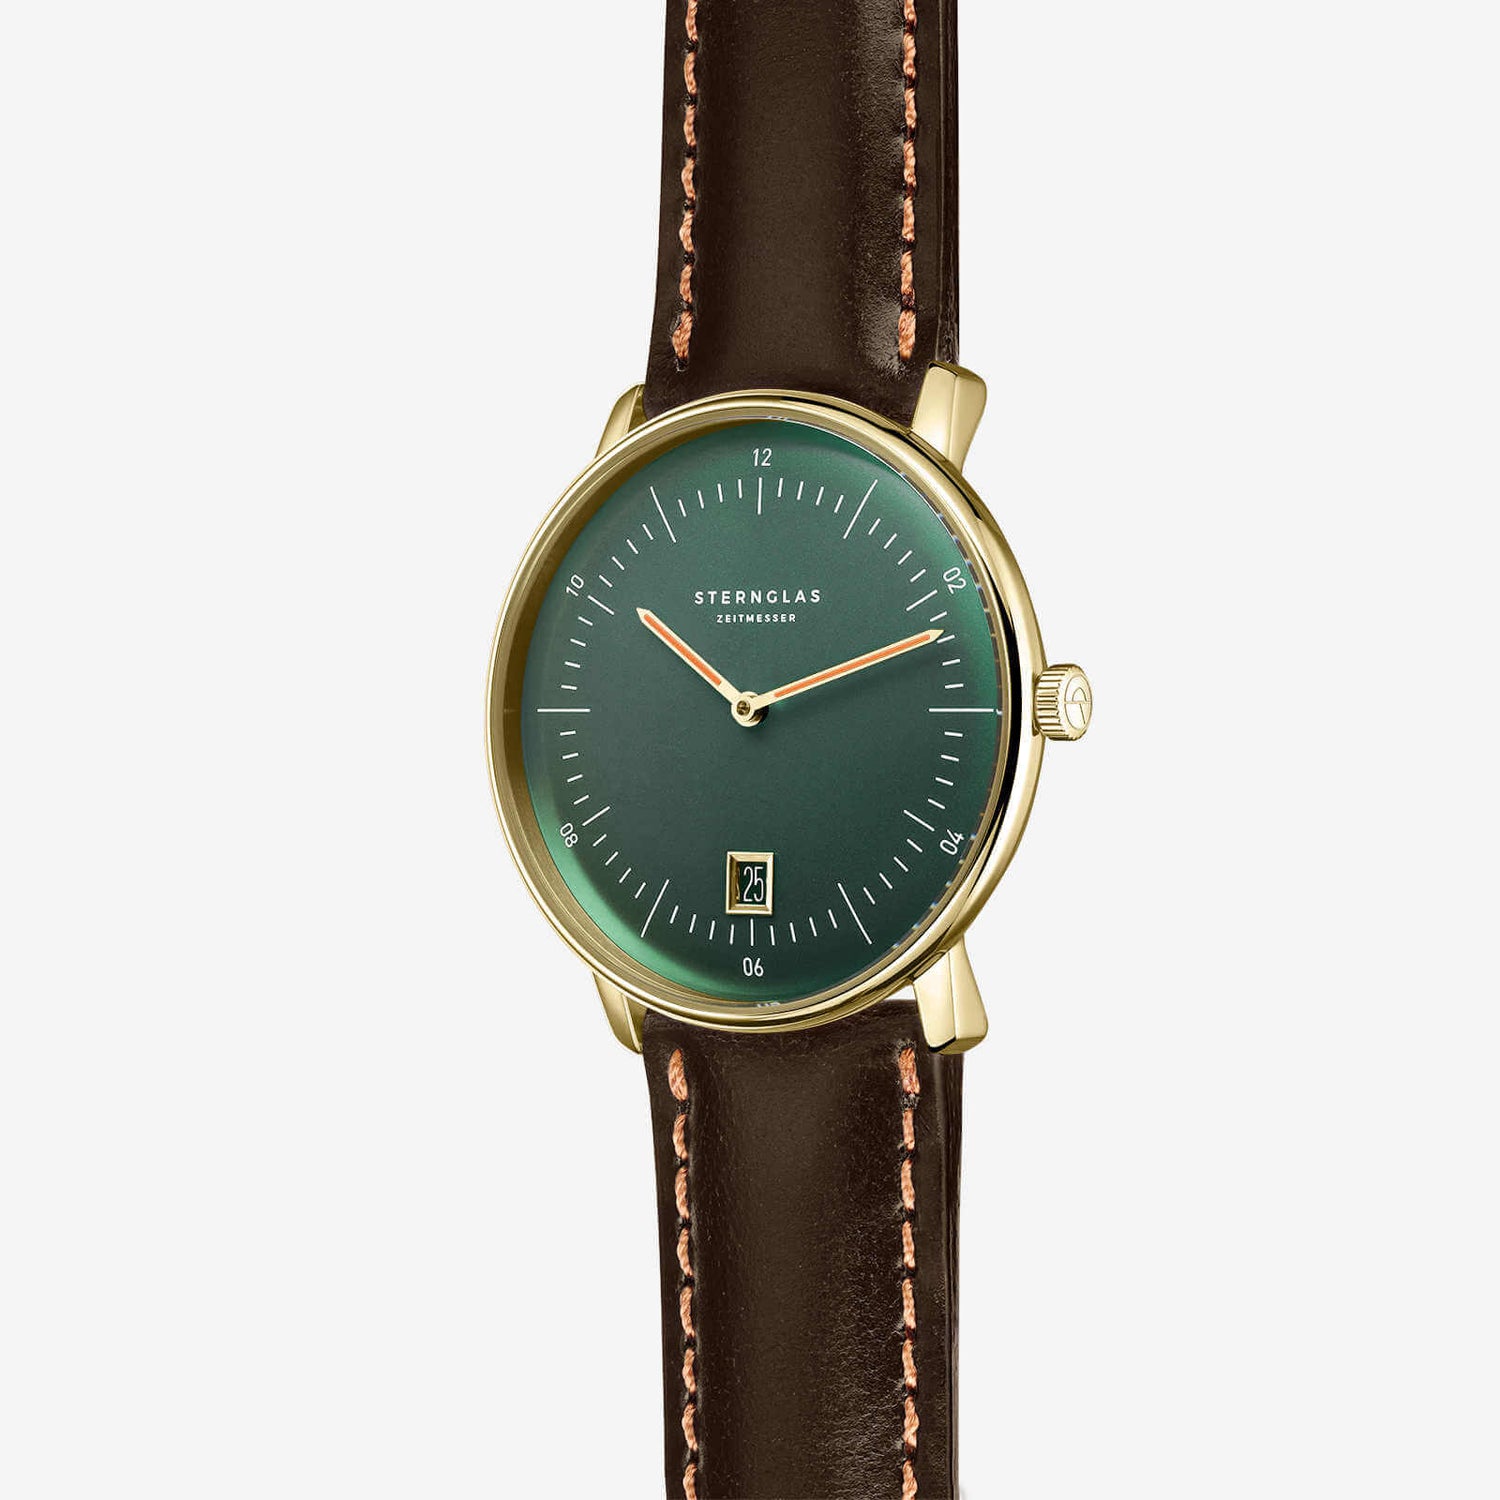 popup|Curved dial|The dial in "British Racing Green" with fine curvature gives the model a noble vintage character.